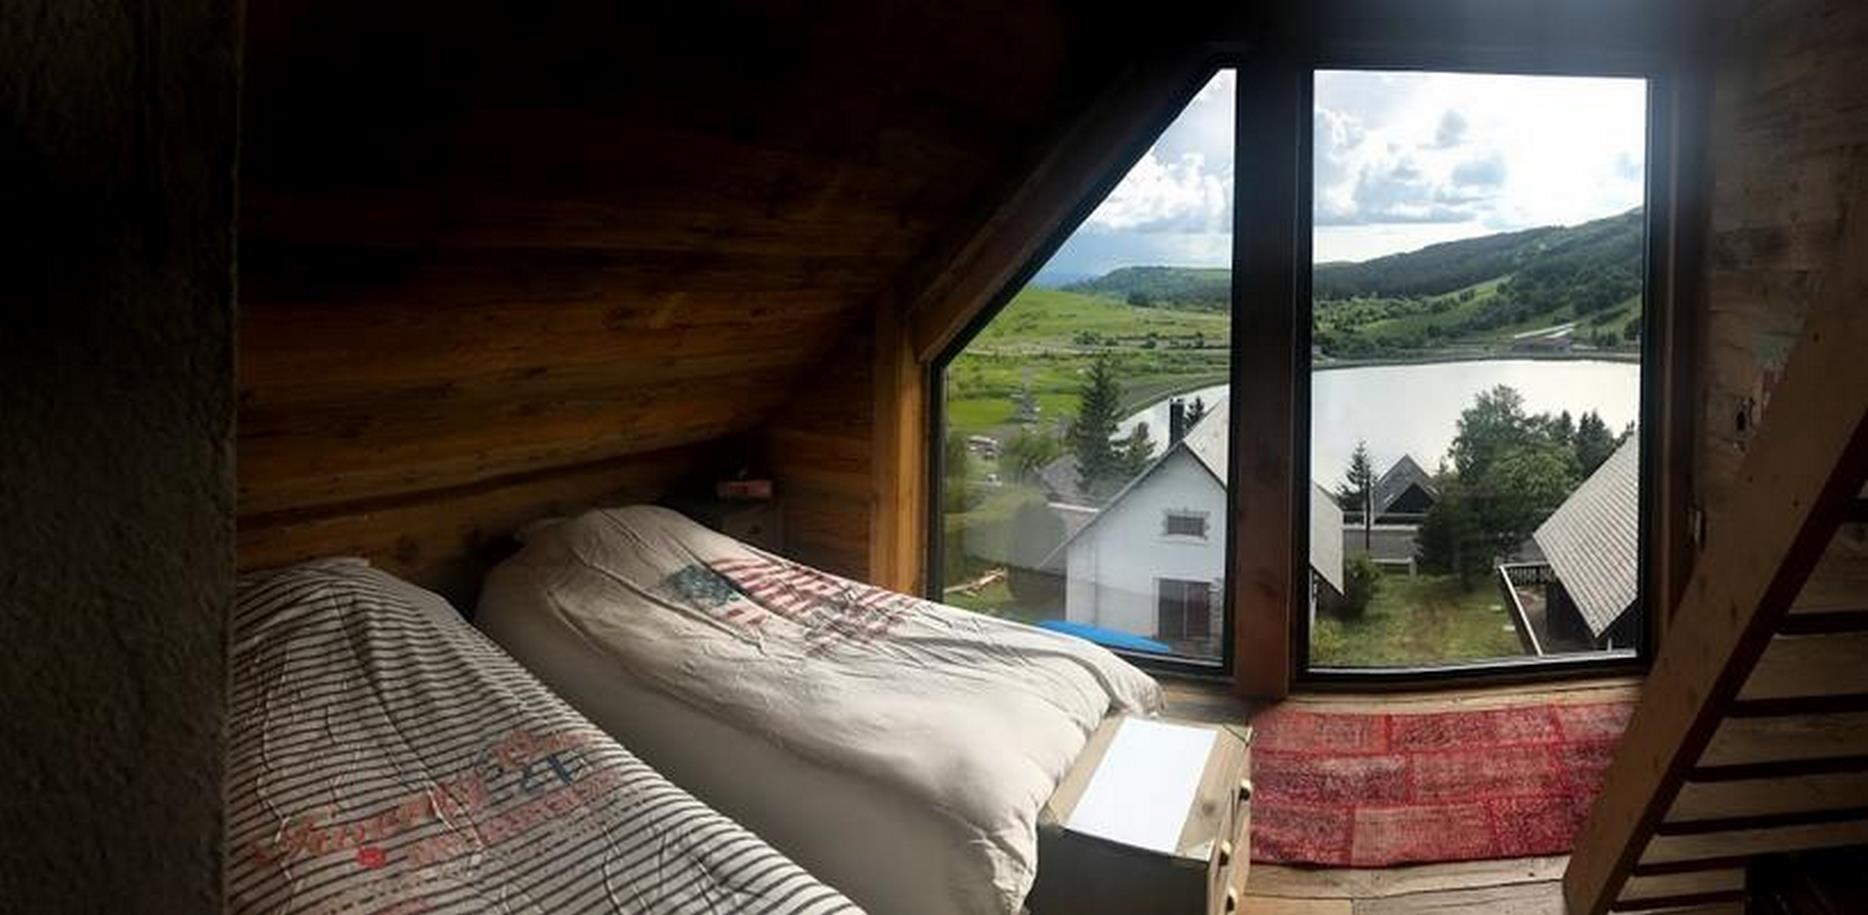 Rental Chalet Super Besse, room for 4 people with mezzanine and magnificent view of the Monts du Cantal